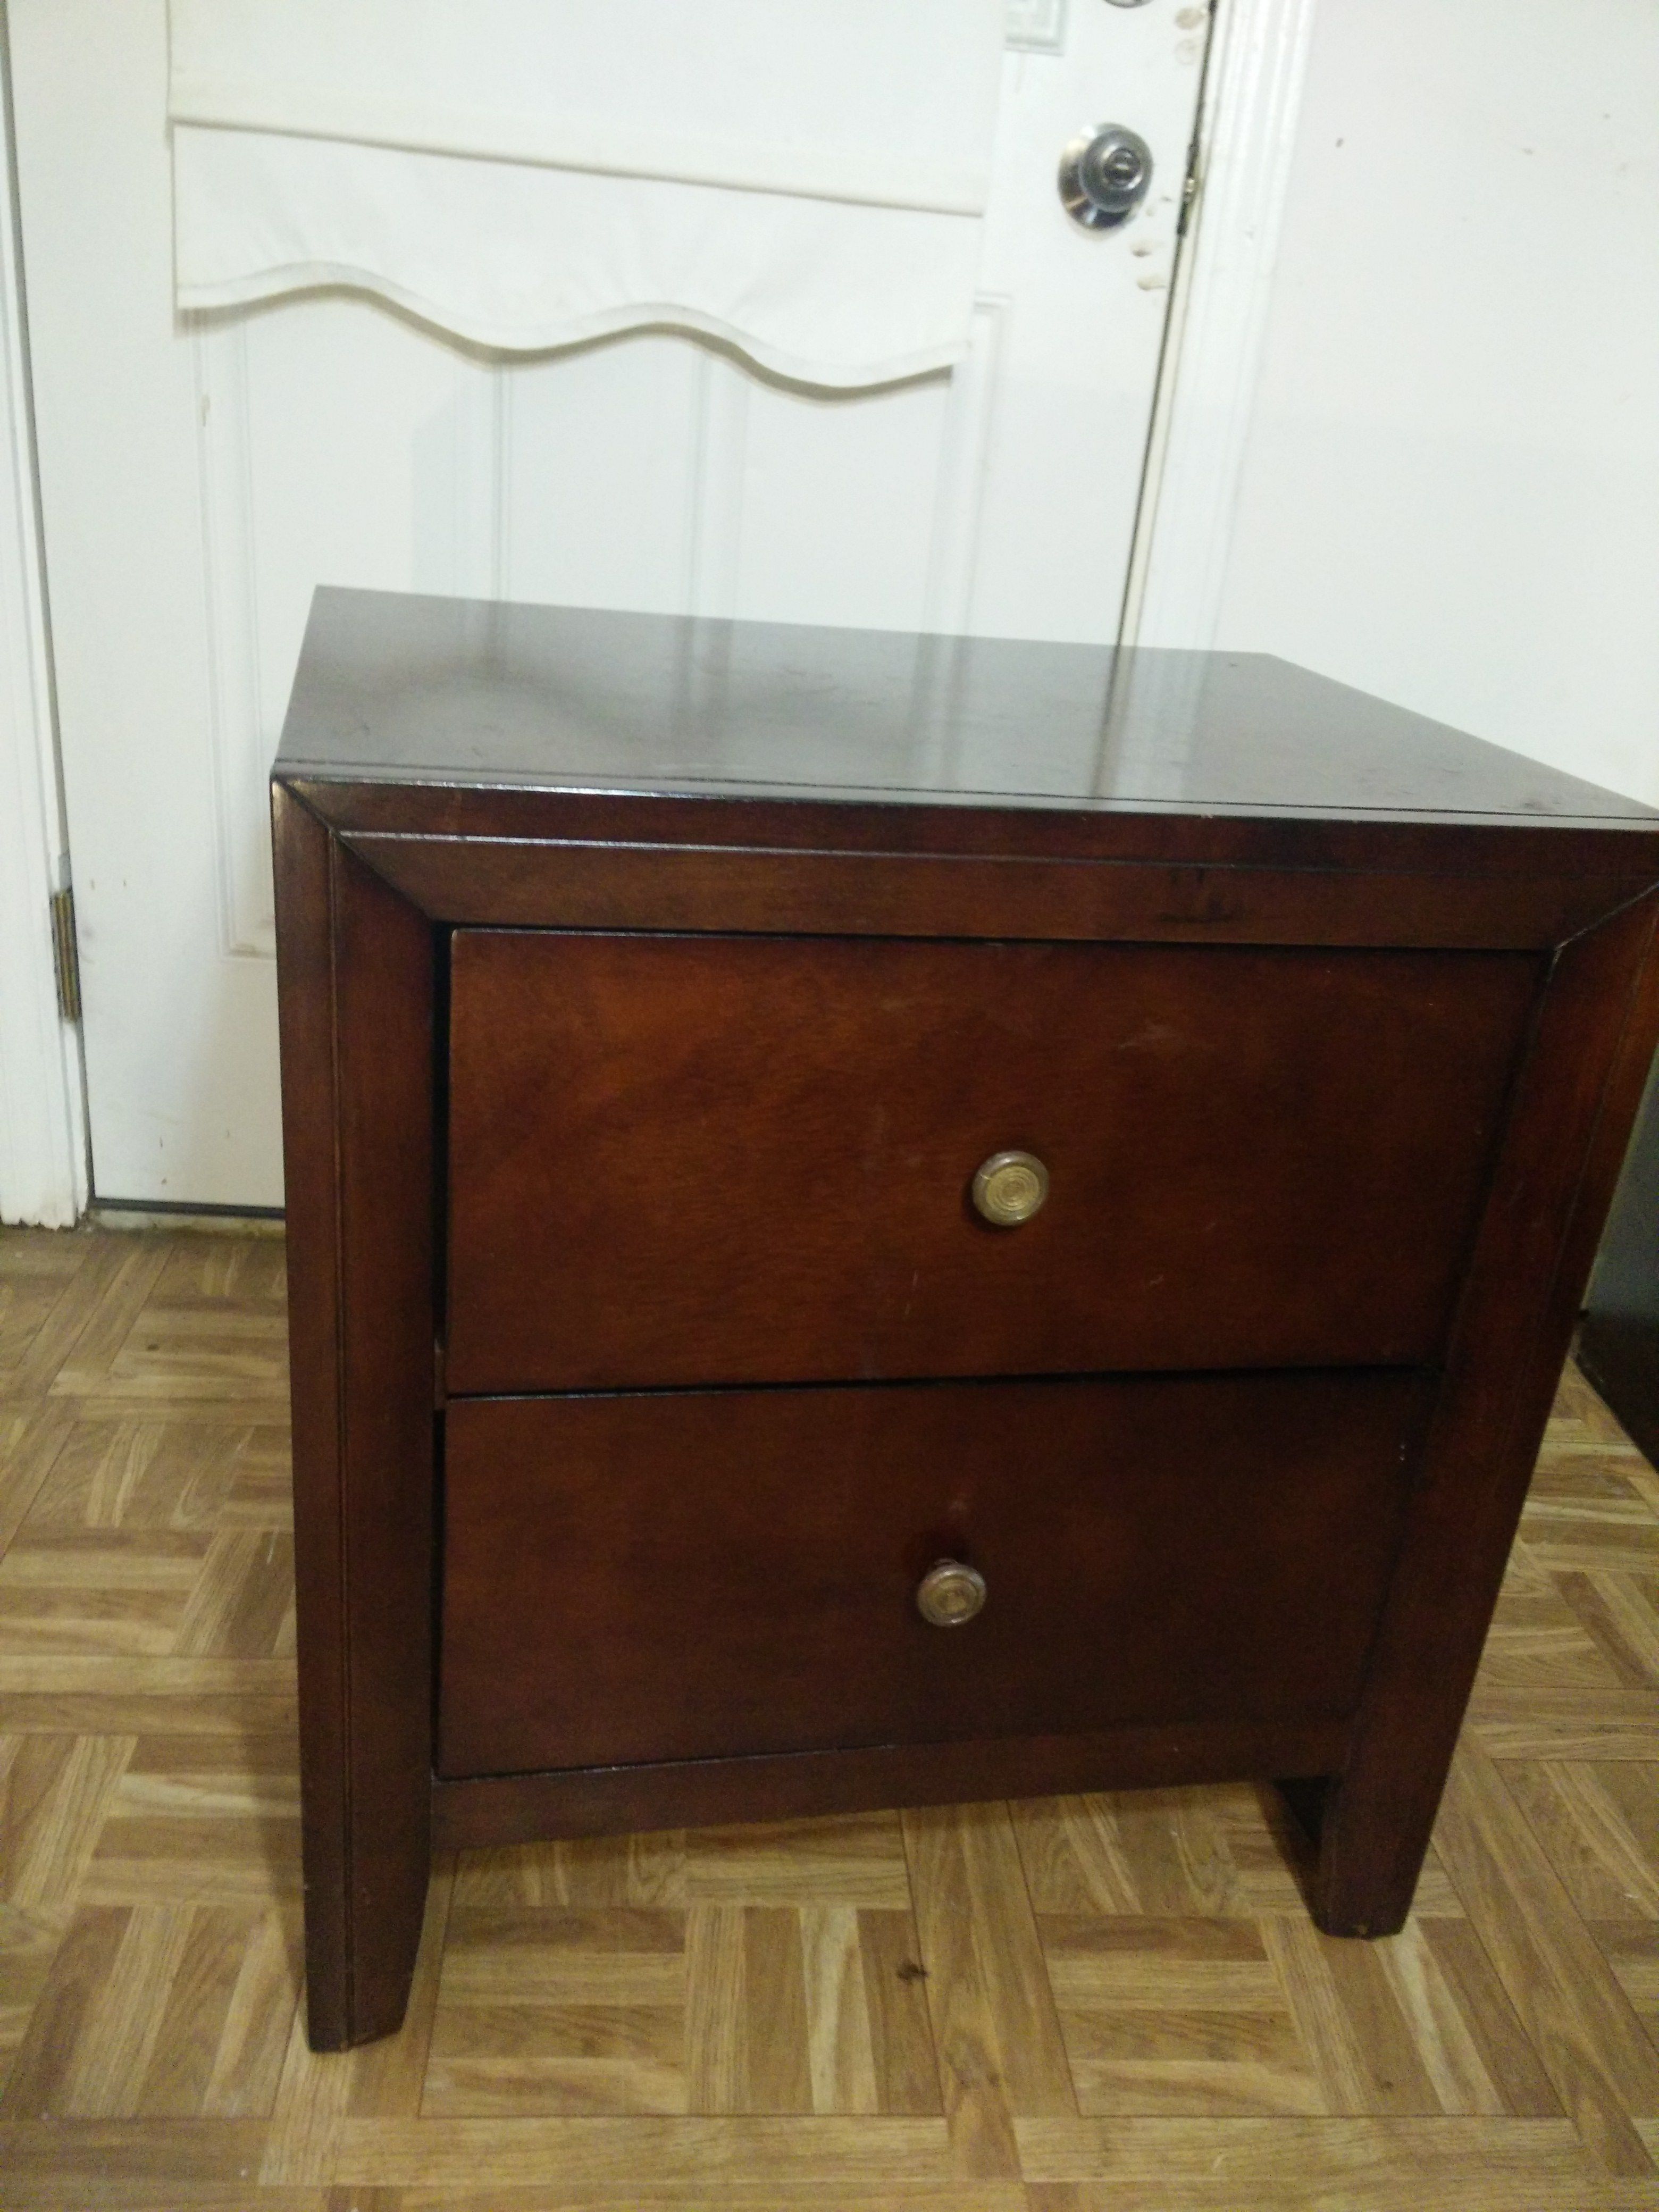 Like new wood night stand in very good condition, all drawers sliding smoothly,